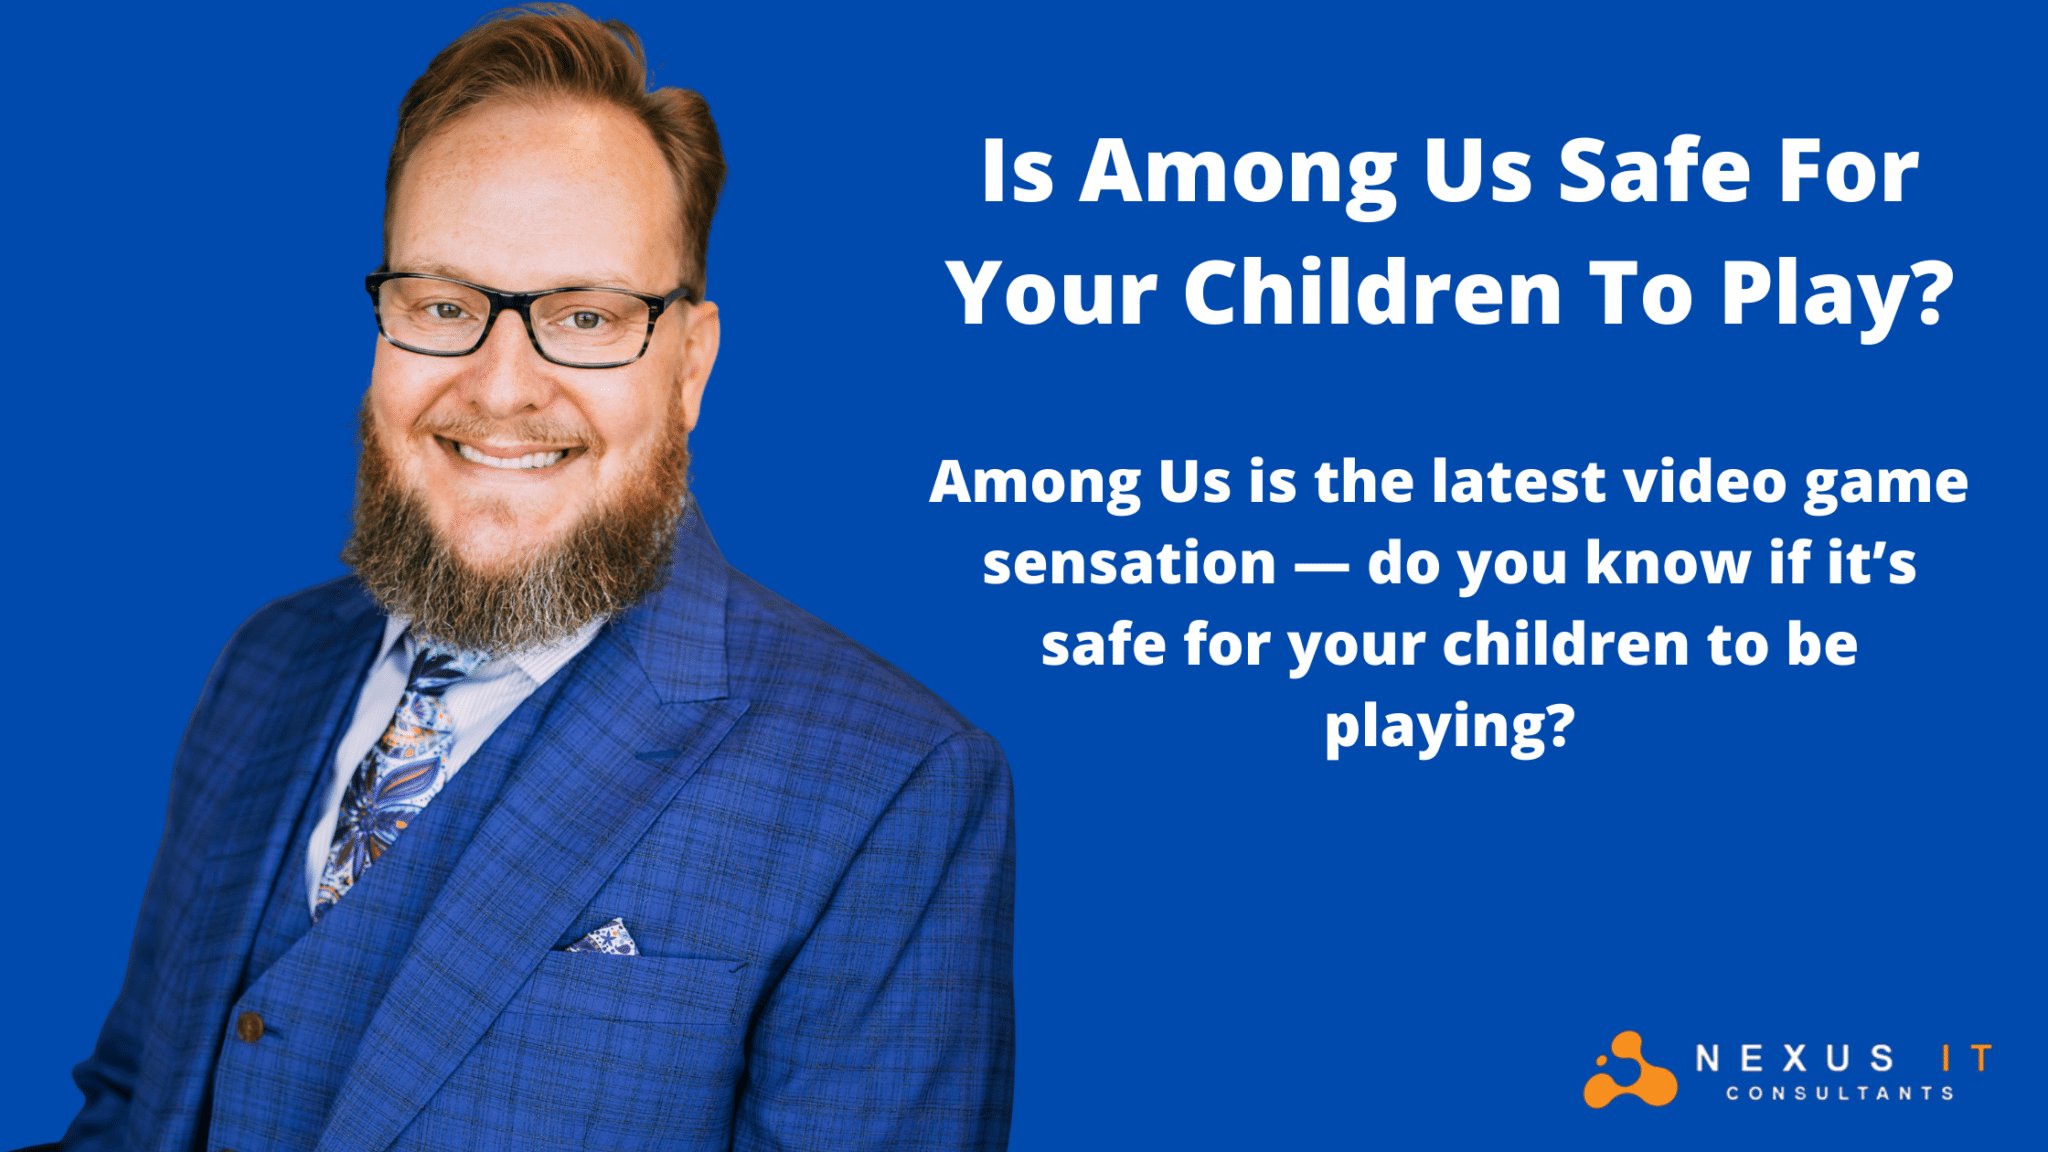 Among Us is the latest video game sensation — do you know if it’s safe for your children to be playing_